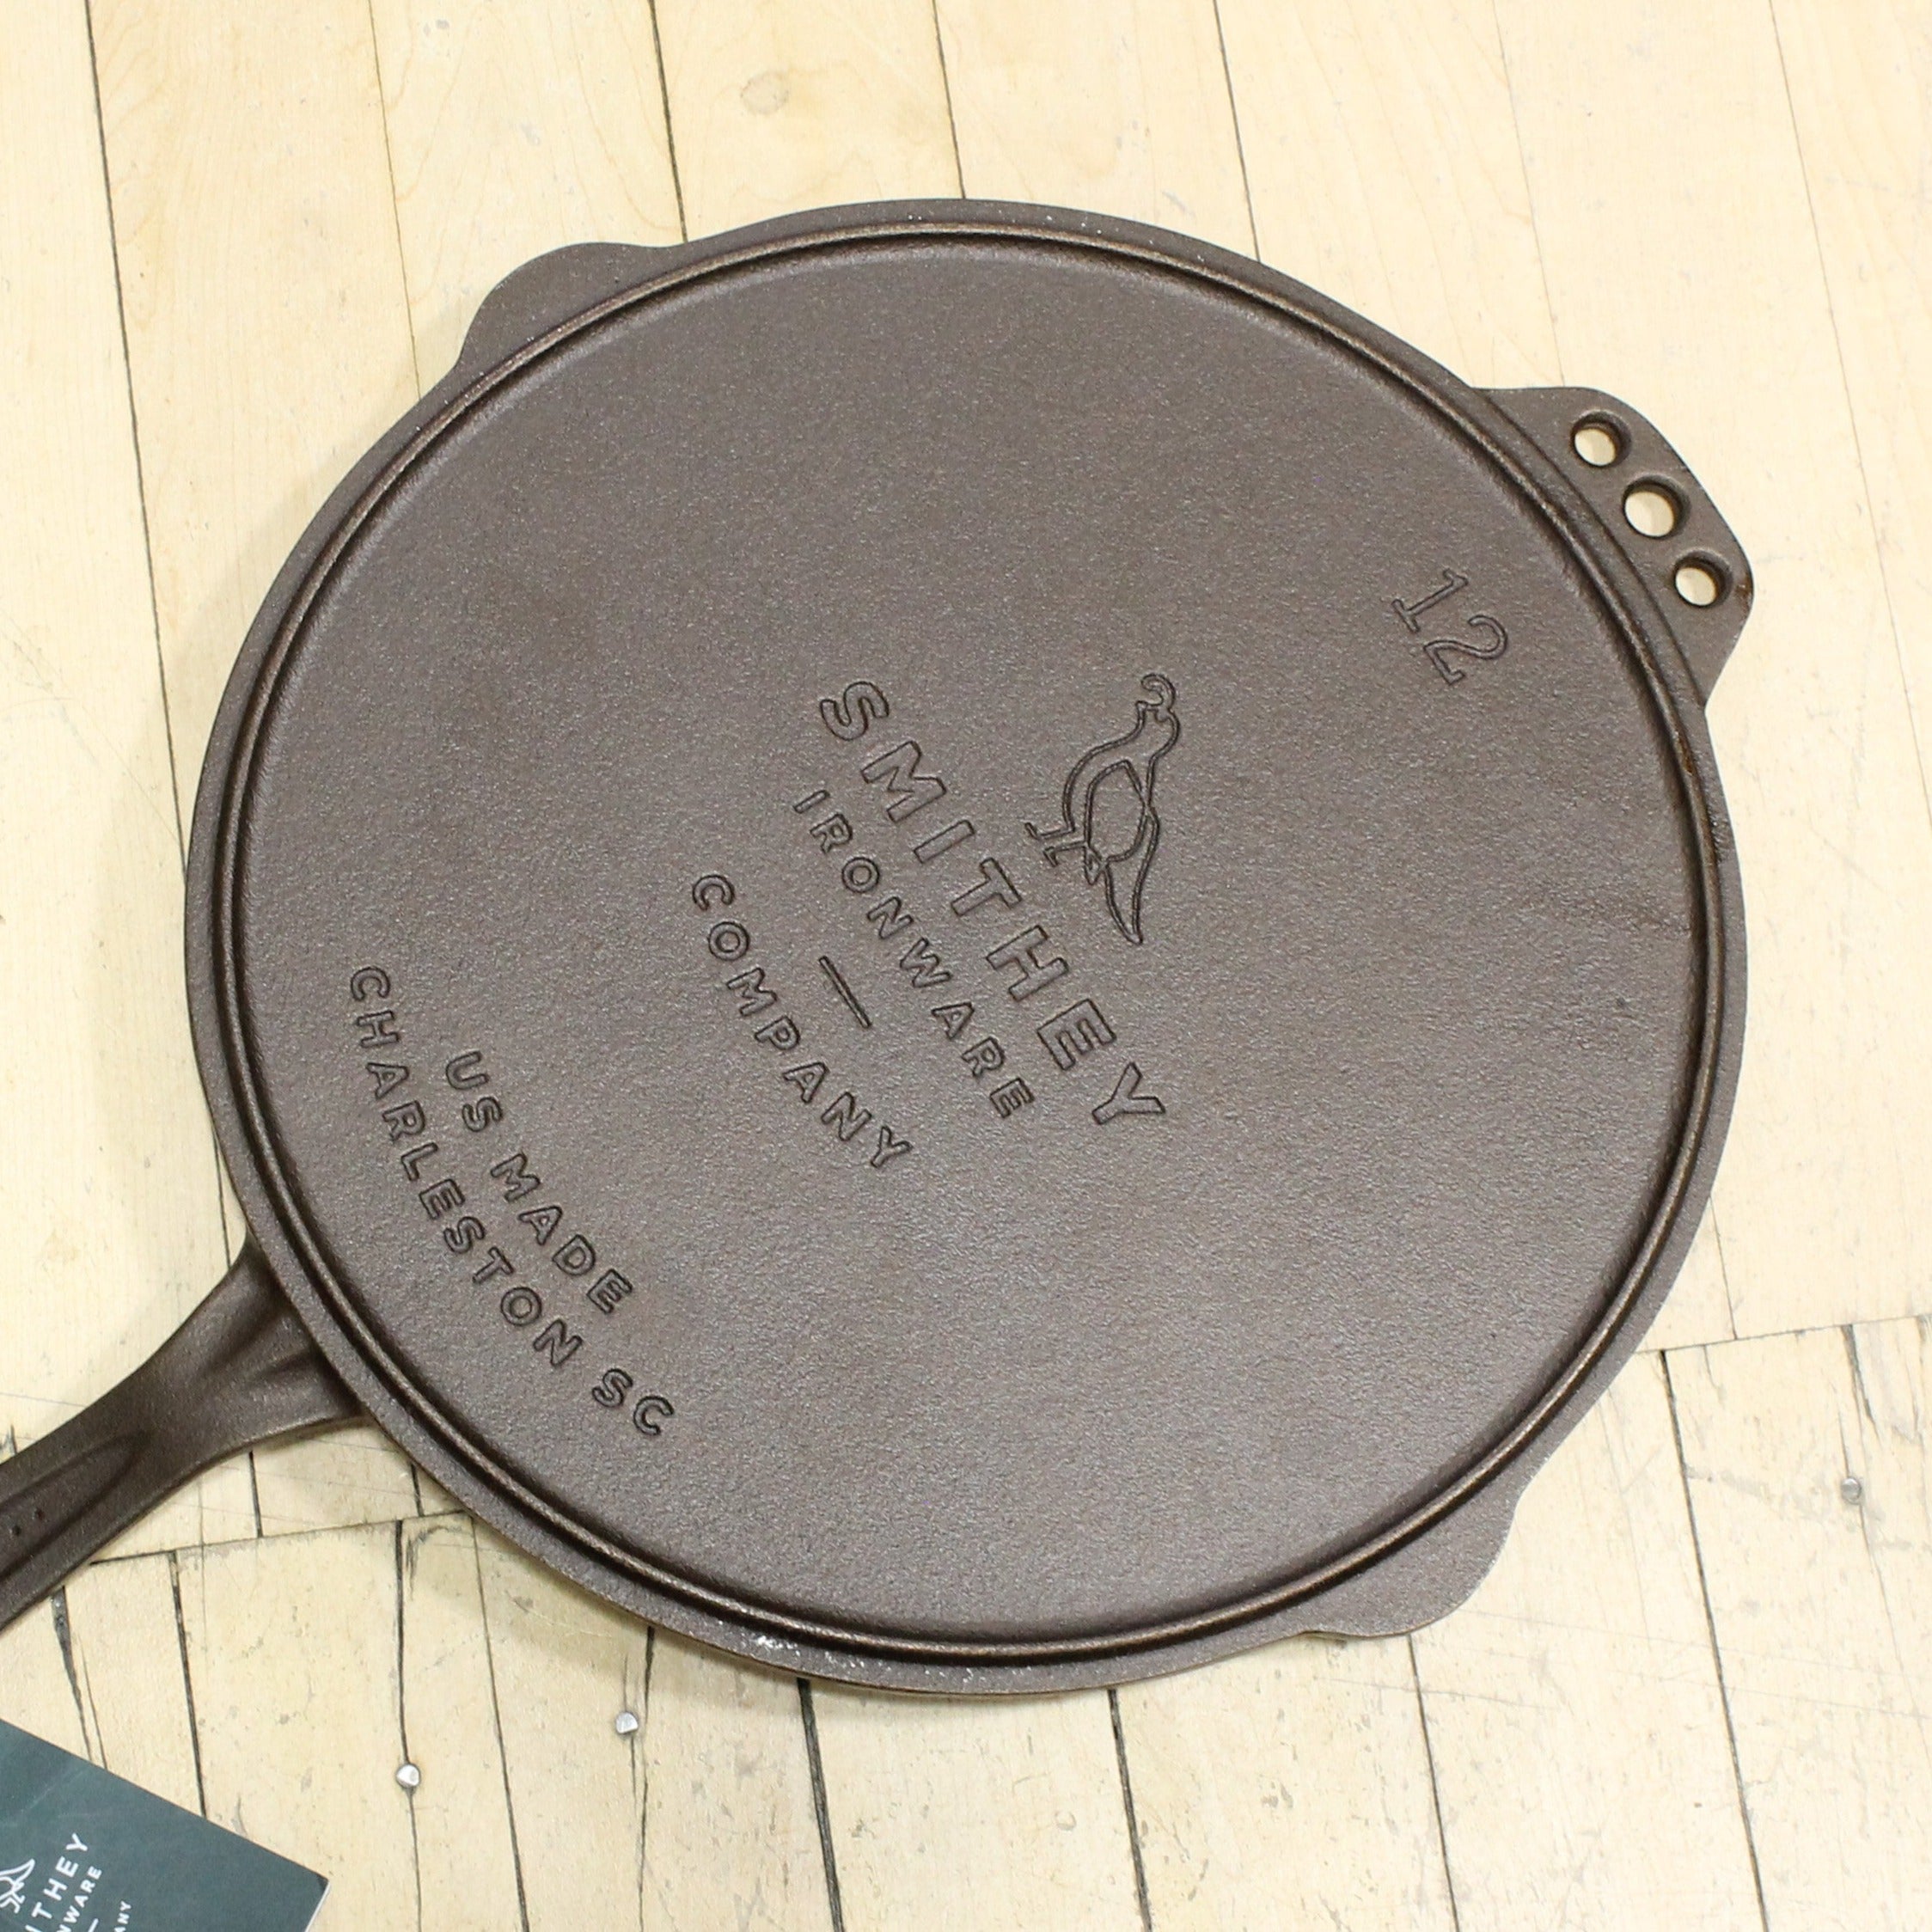 Smithey Ironware No. 12 Flat Top Griddle view of bottom